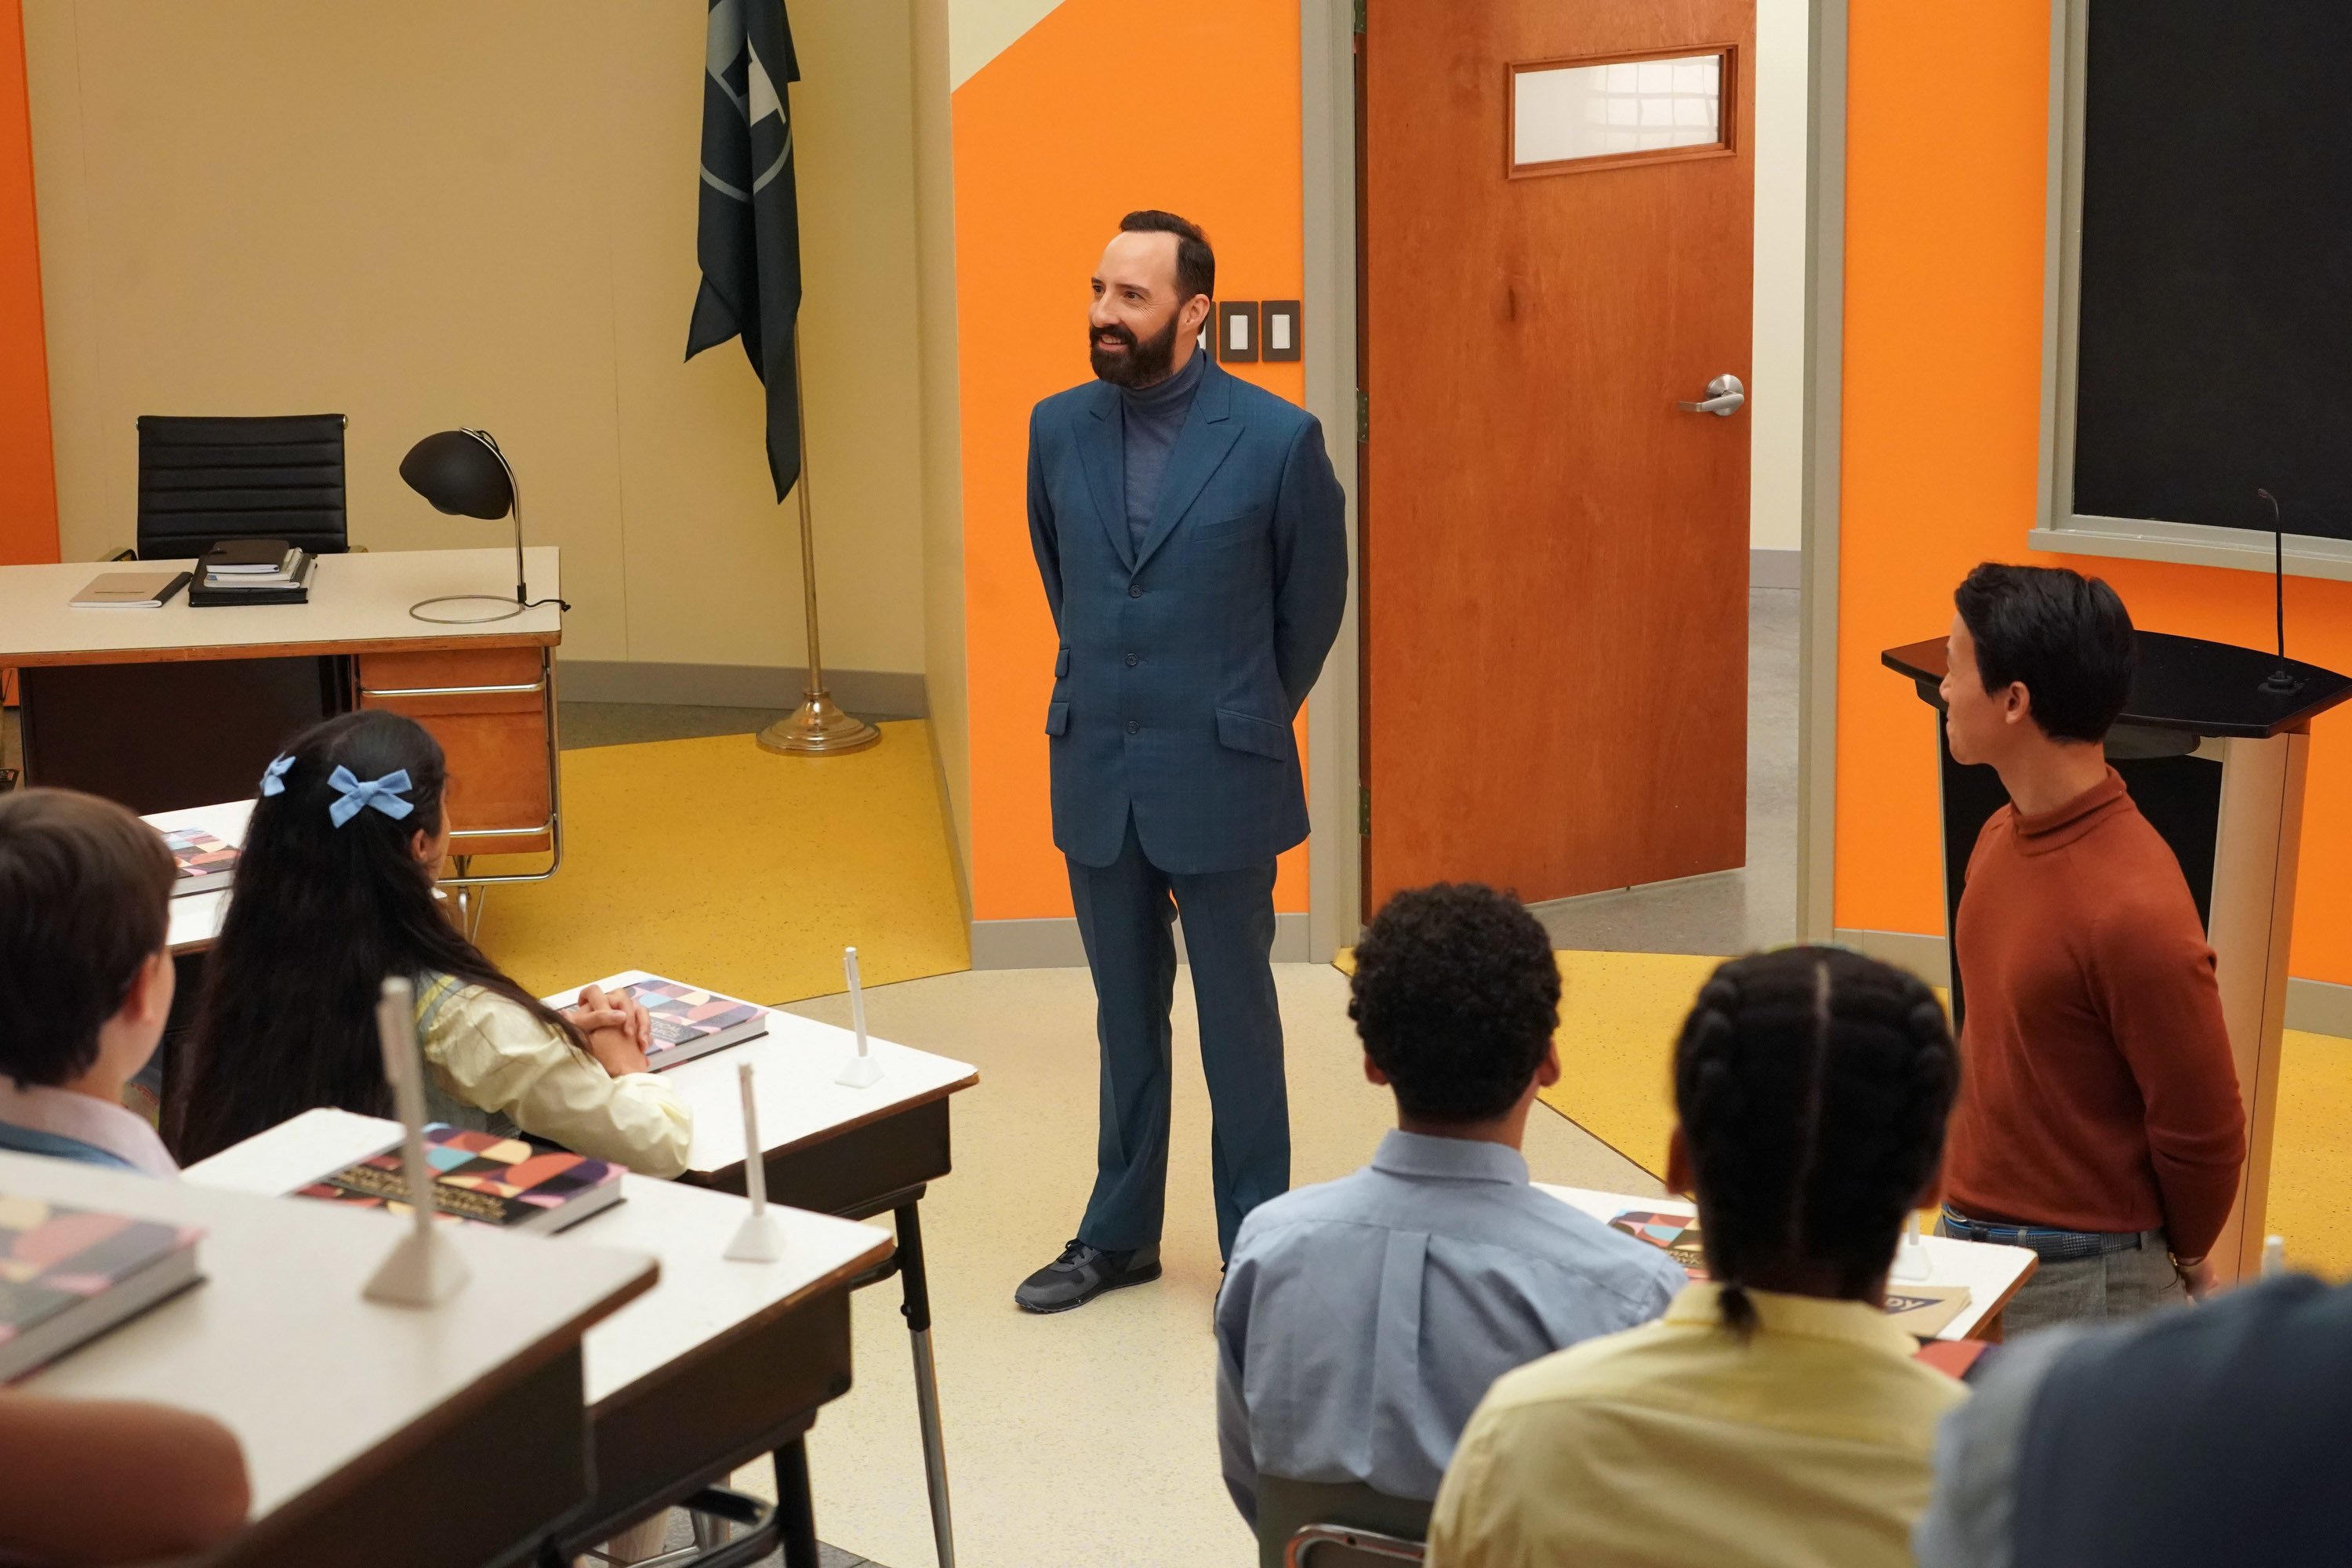 Tony Hale as Mr. Curtain speaks to the class